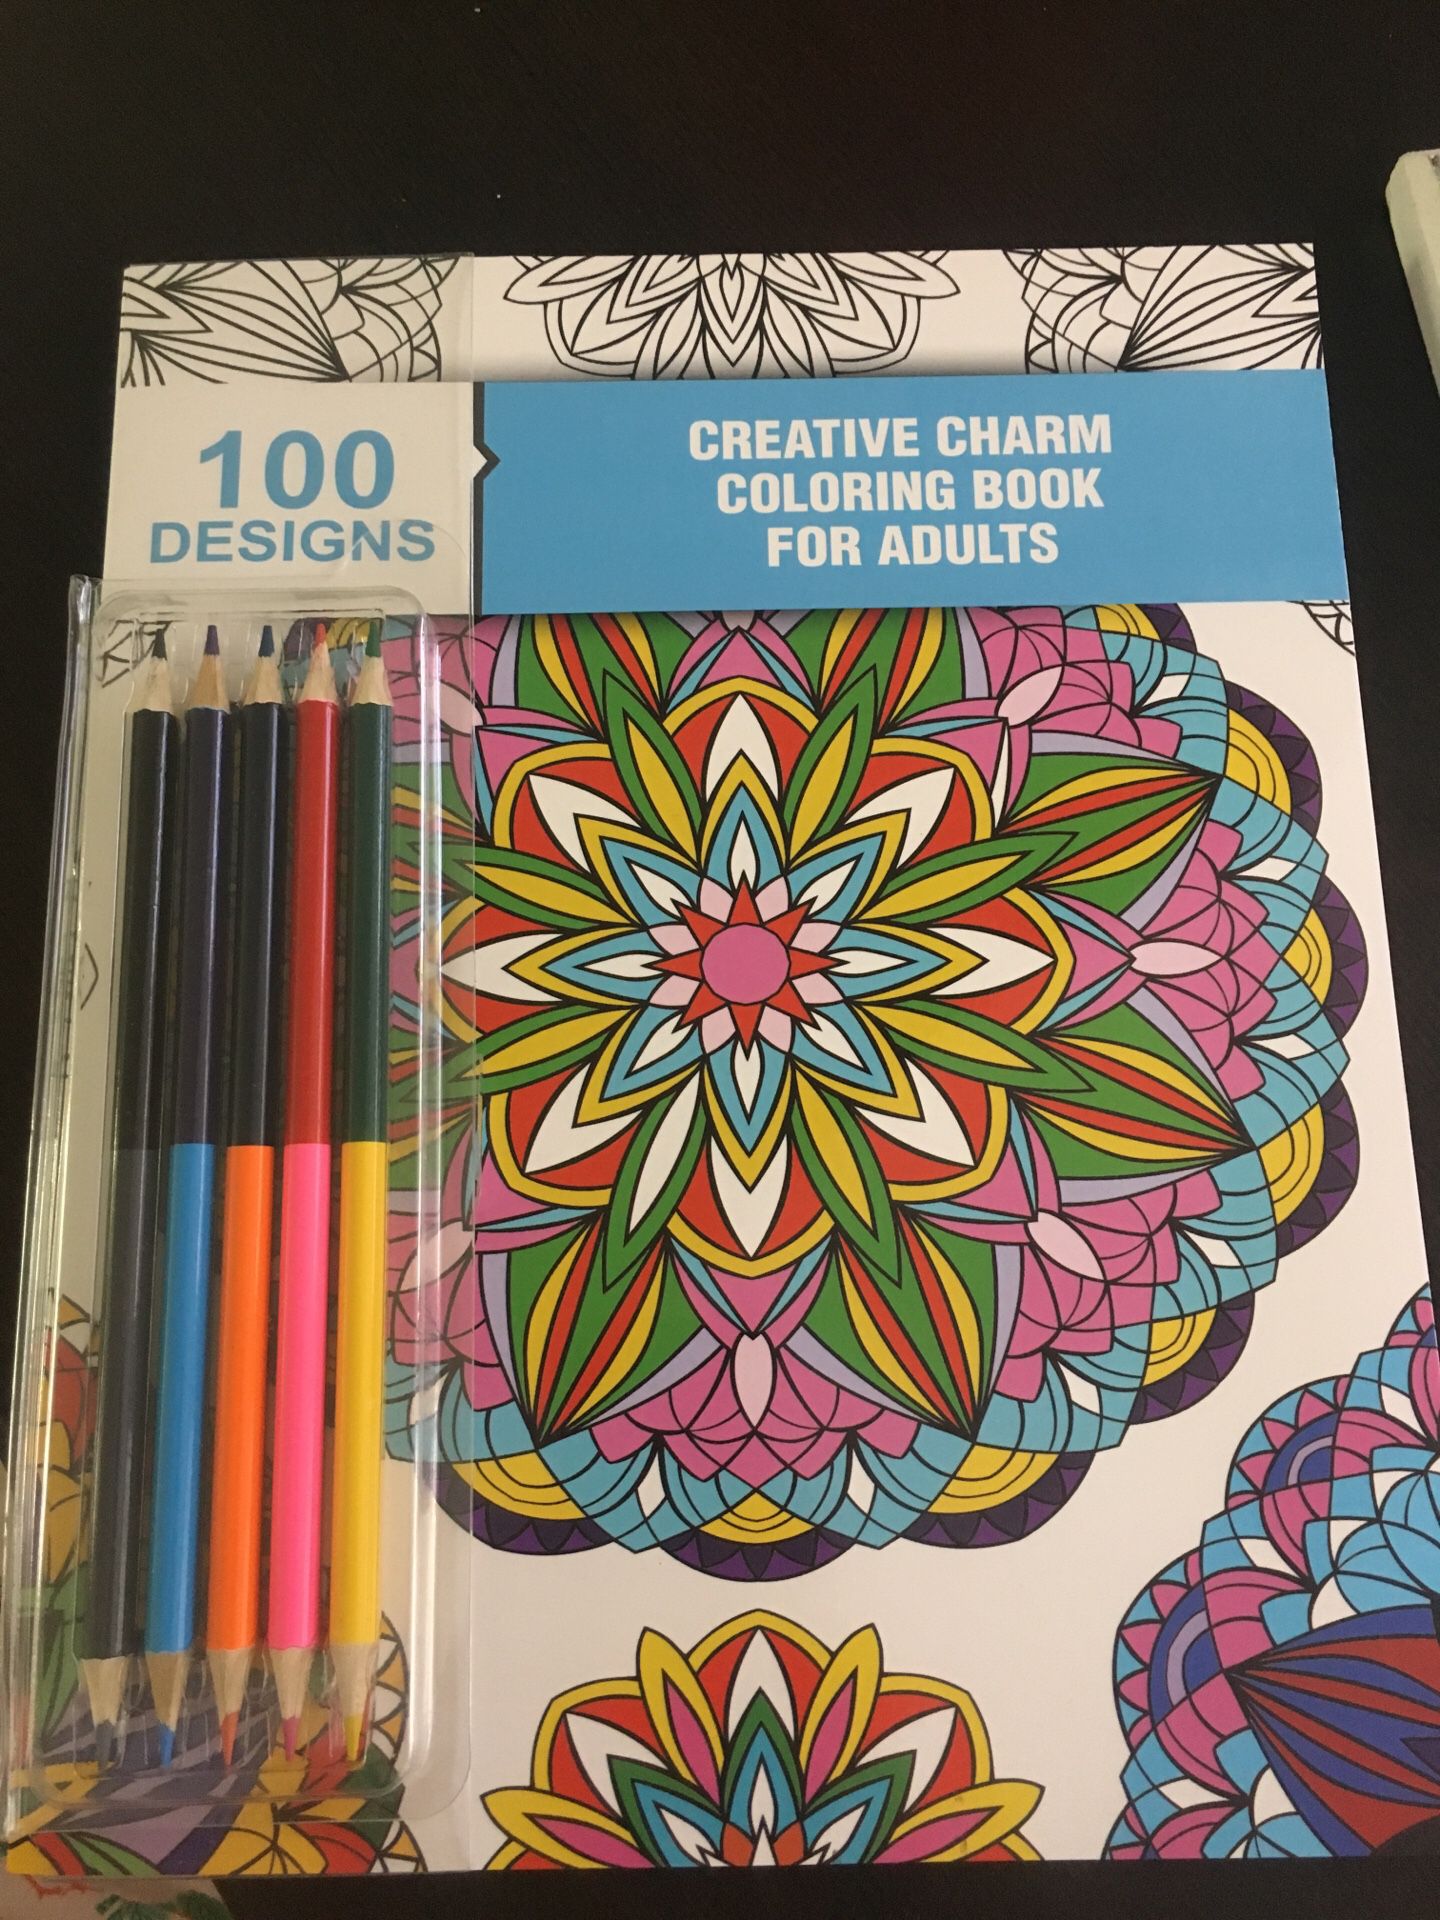 Timeless Creations “FOLLOW YOUR DREAMS” Adult Coloring Book w/ 64 Pages for  Sale in Miramar, FL - OfferUp